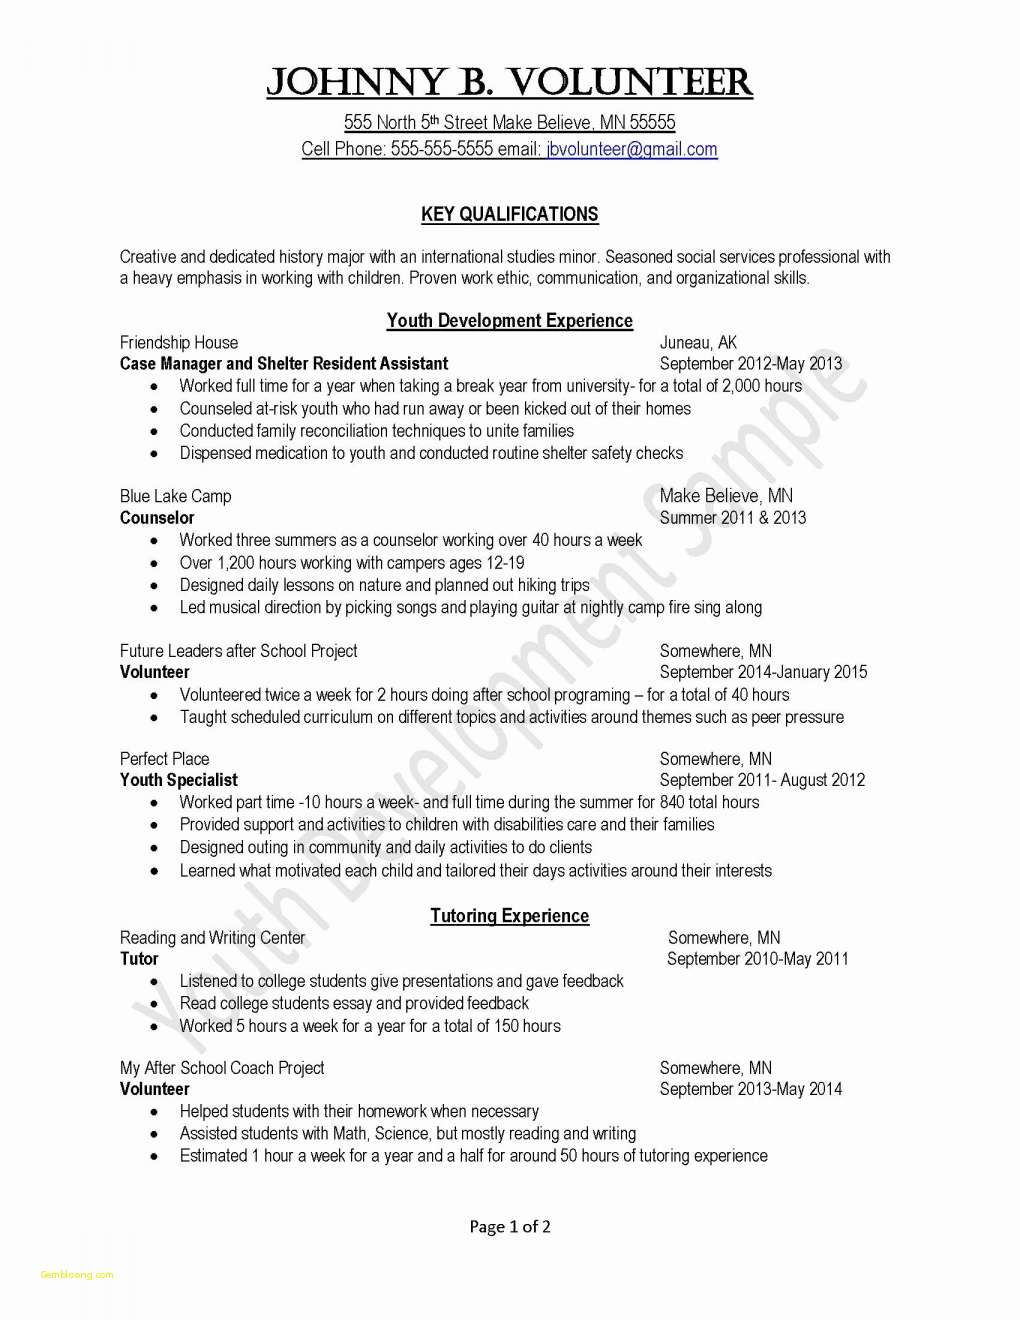 Professional Cover Letter Template - Free Resume Templates for Students Takenosumi